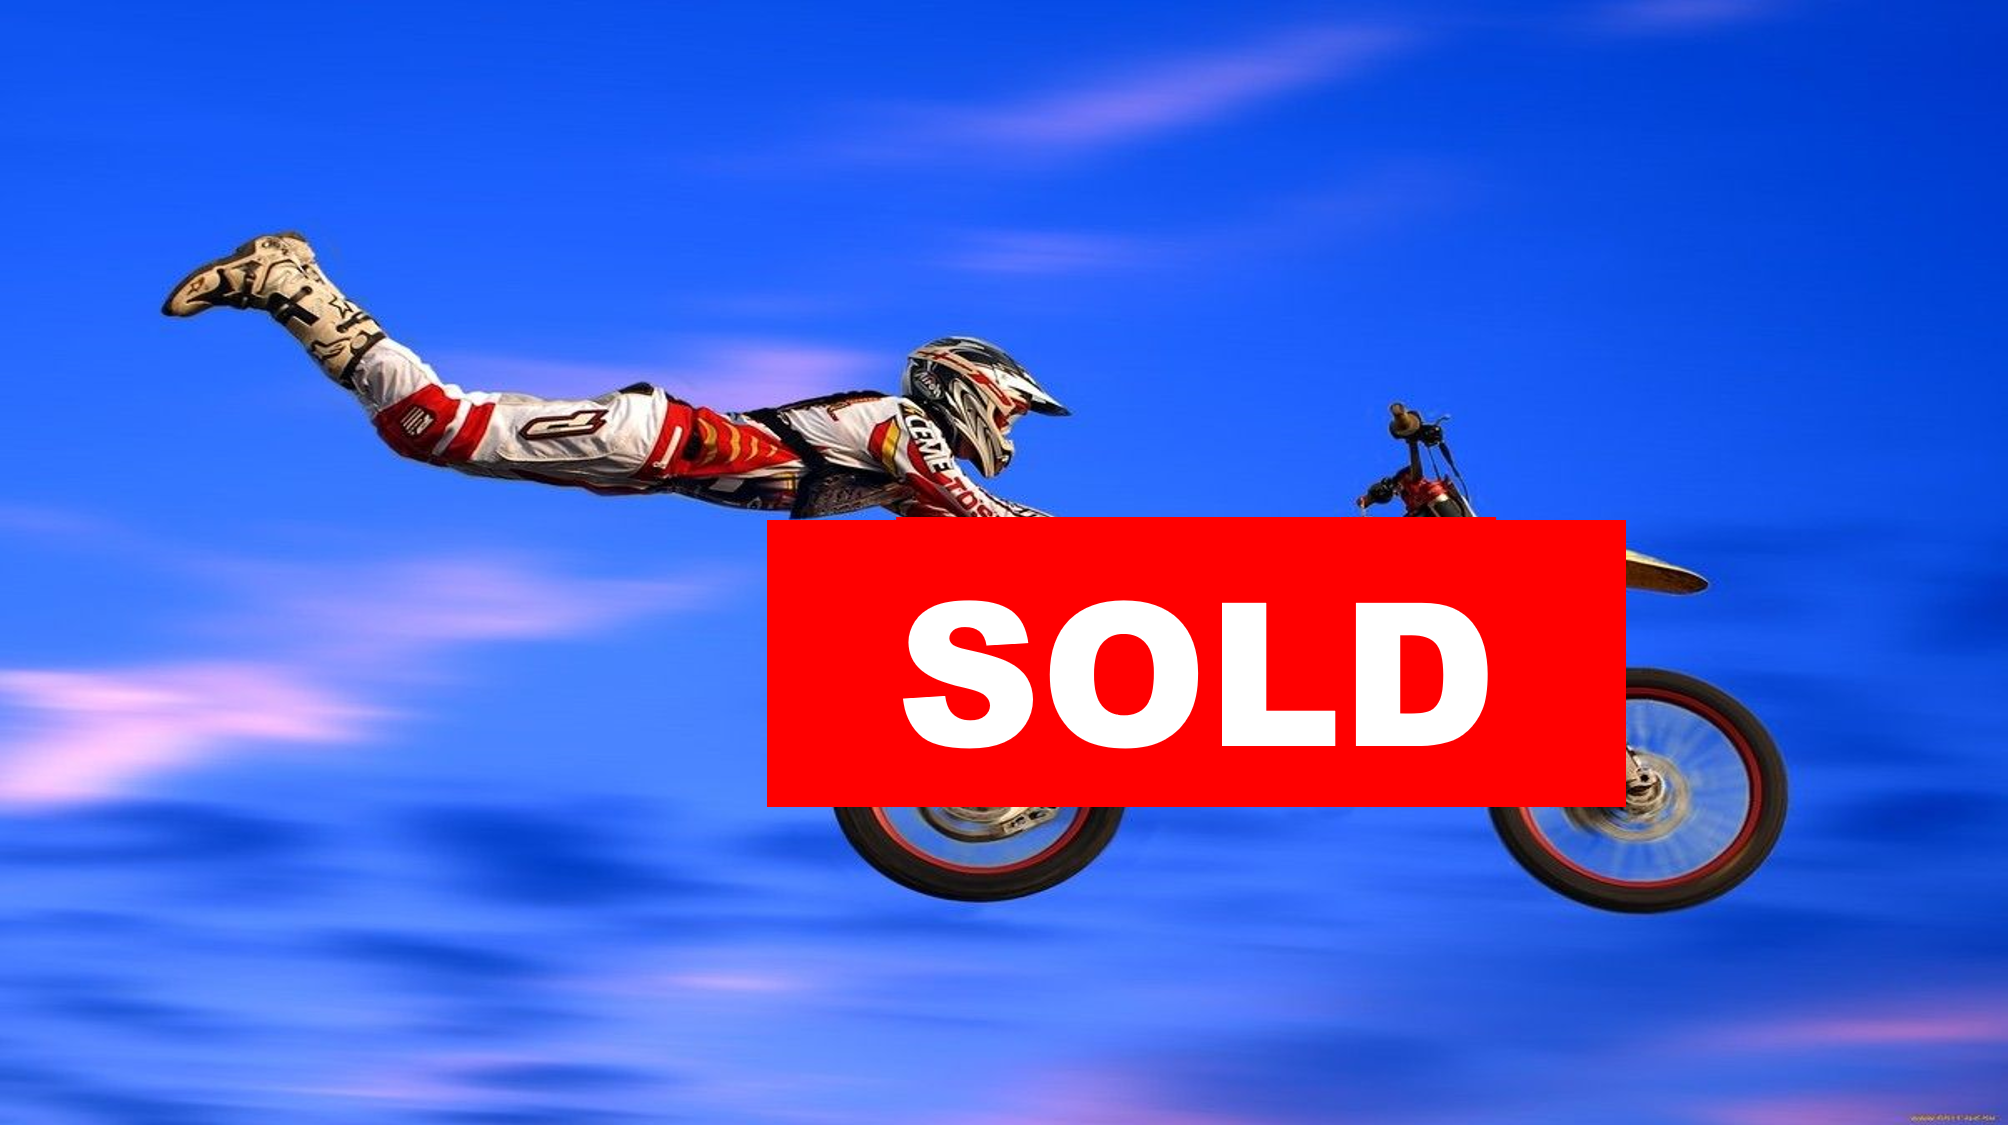 SOLD Motorcycle Dealers wanted call 0450 811 955